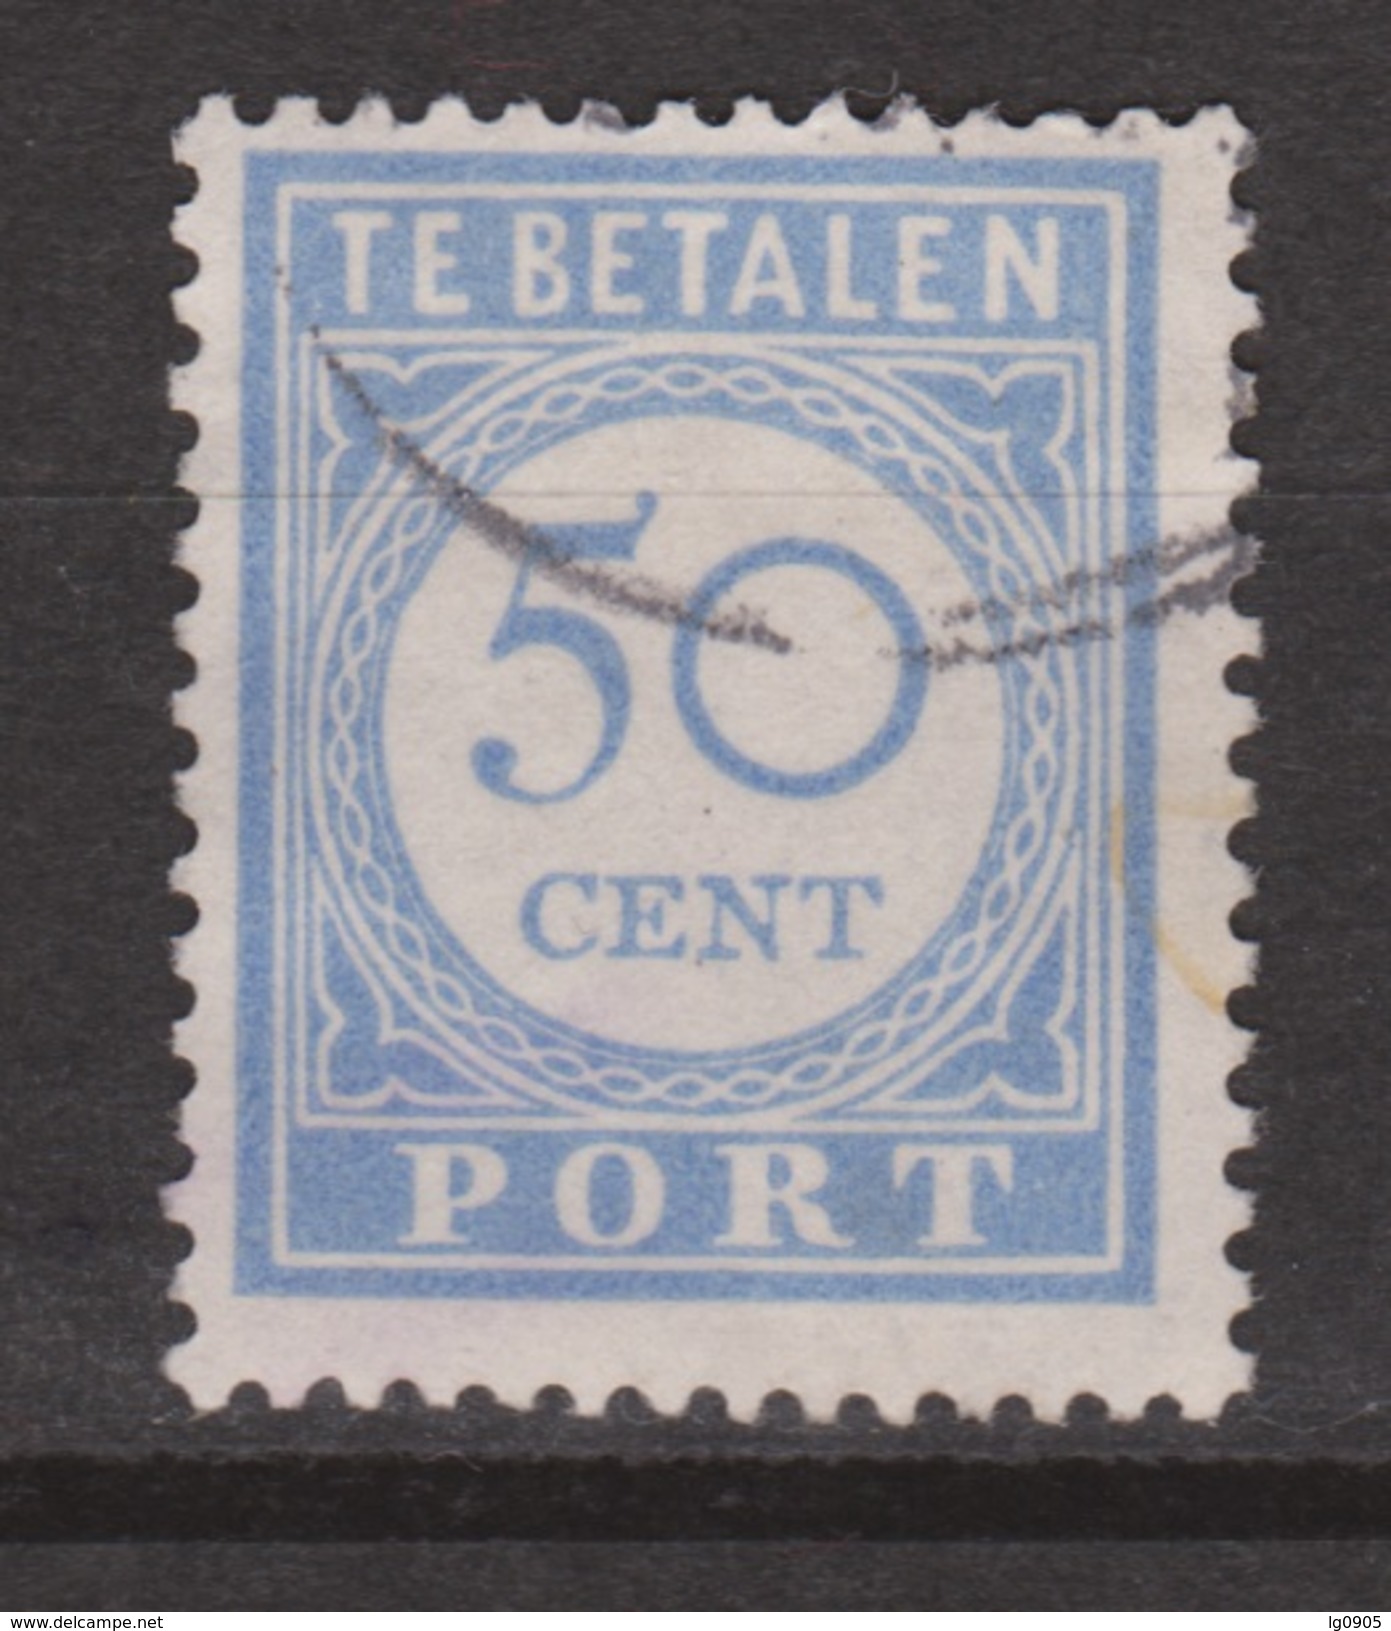 NVPH Nederland Netherlands Holanda Pays Bas Port 60 Used Timbre-taxe Postmarke Sellos De Correos NOW MANY DUE STAMPS - Postage Due